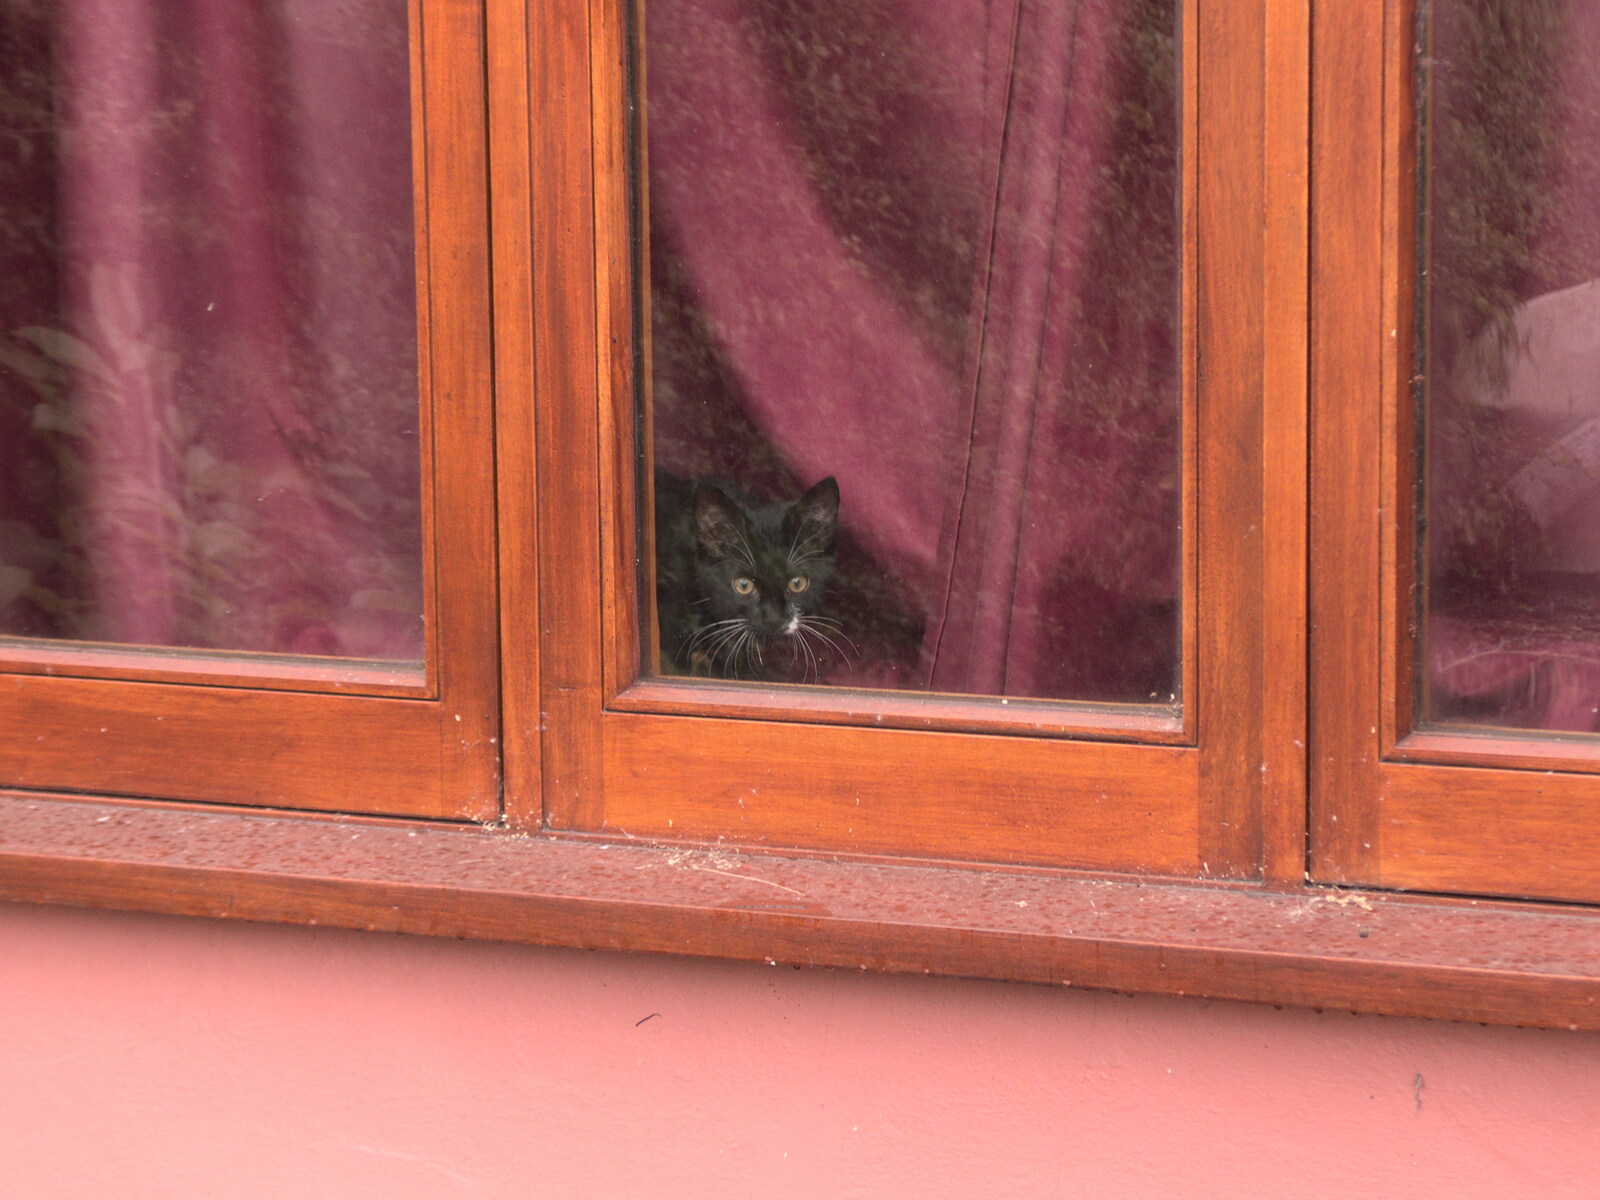 Lucy - Tiny Kitten - peers out of the window from Head Out Not Home: A Music Day, Norwich, Norfolk - 22nd August 2021